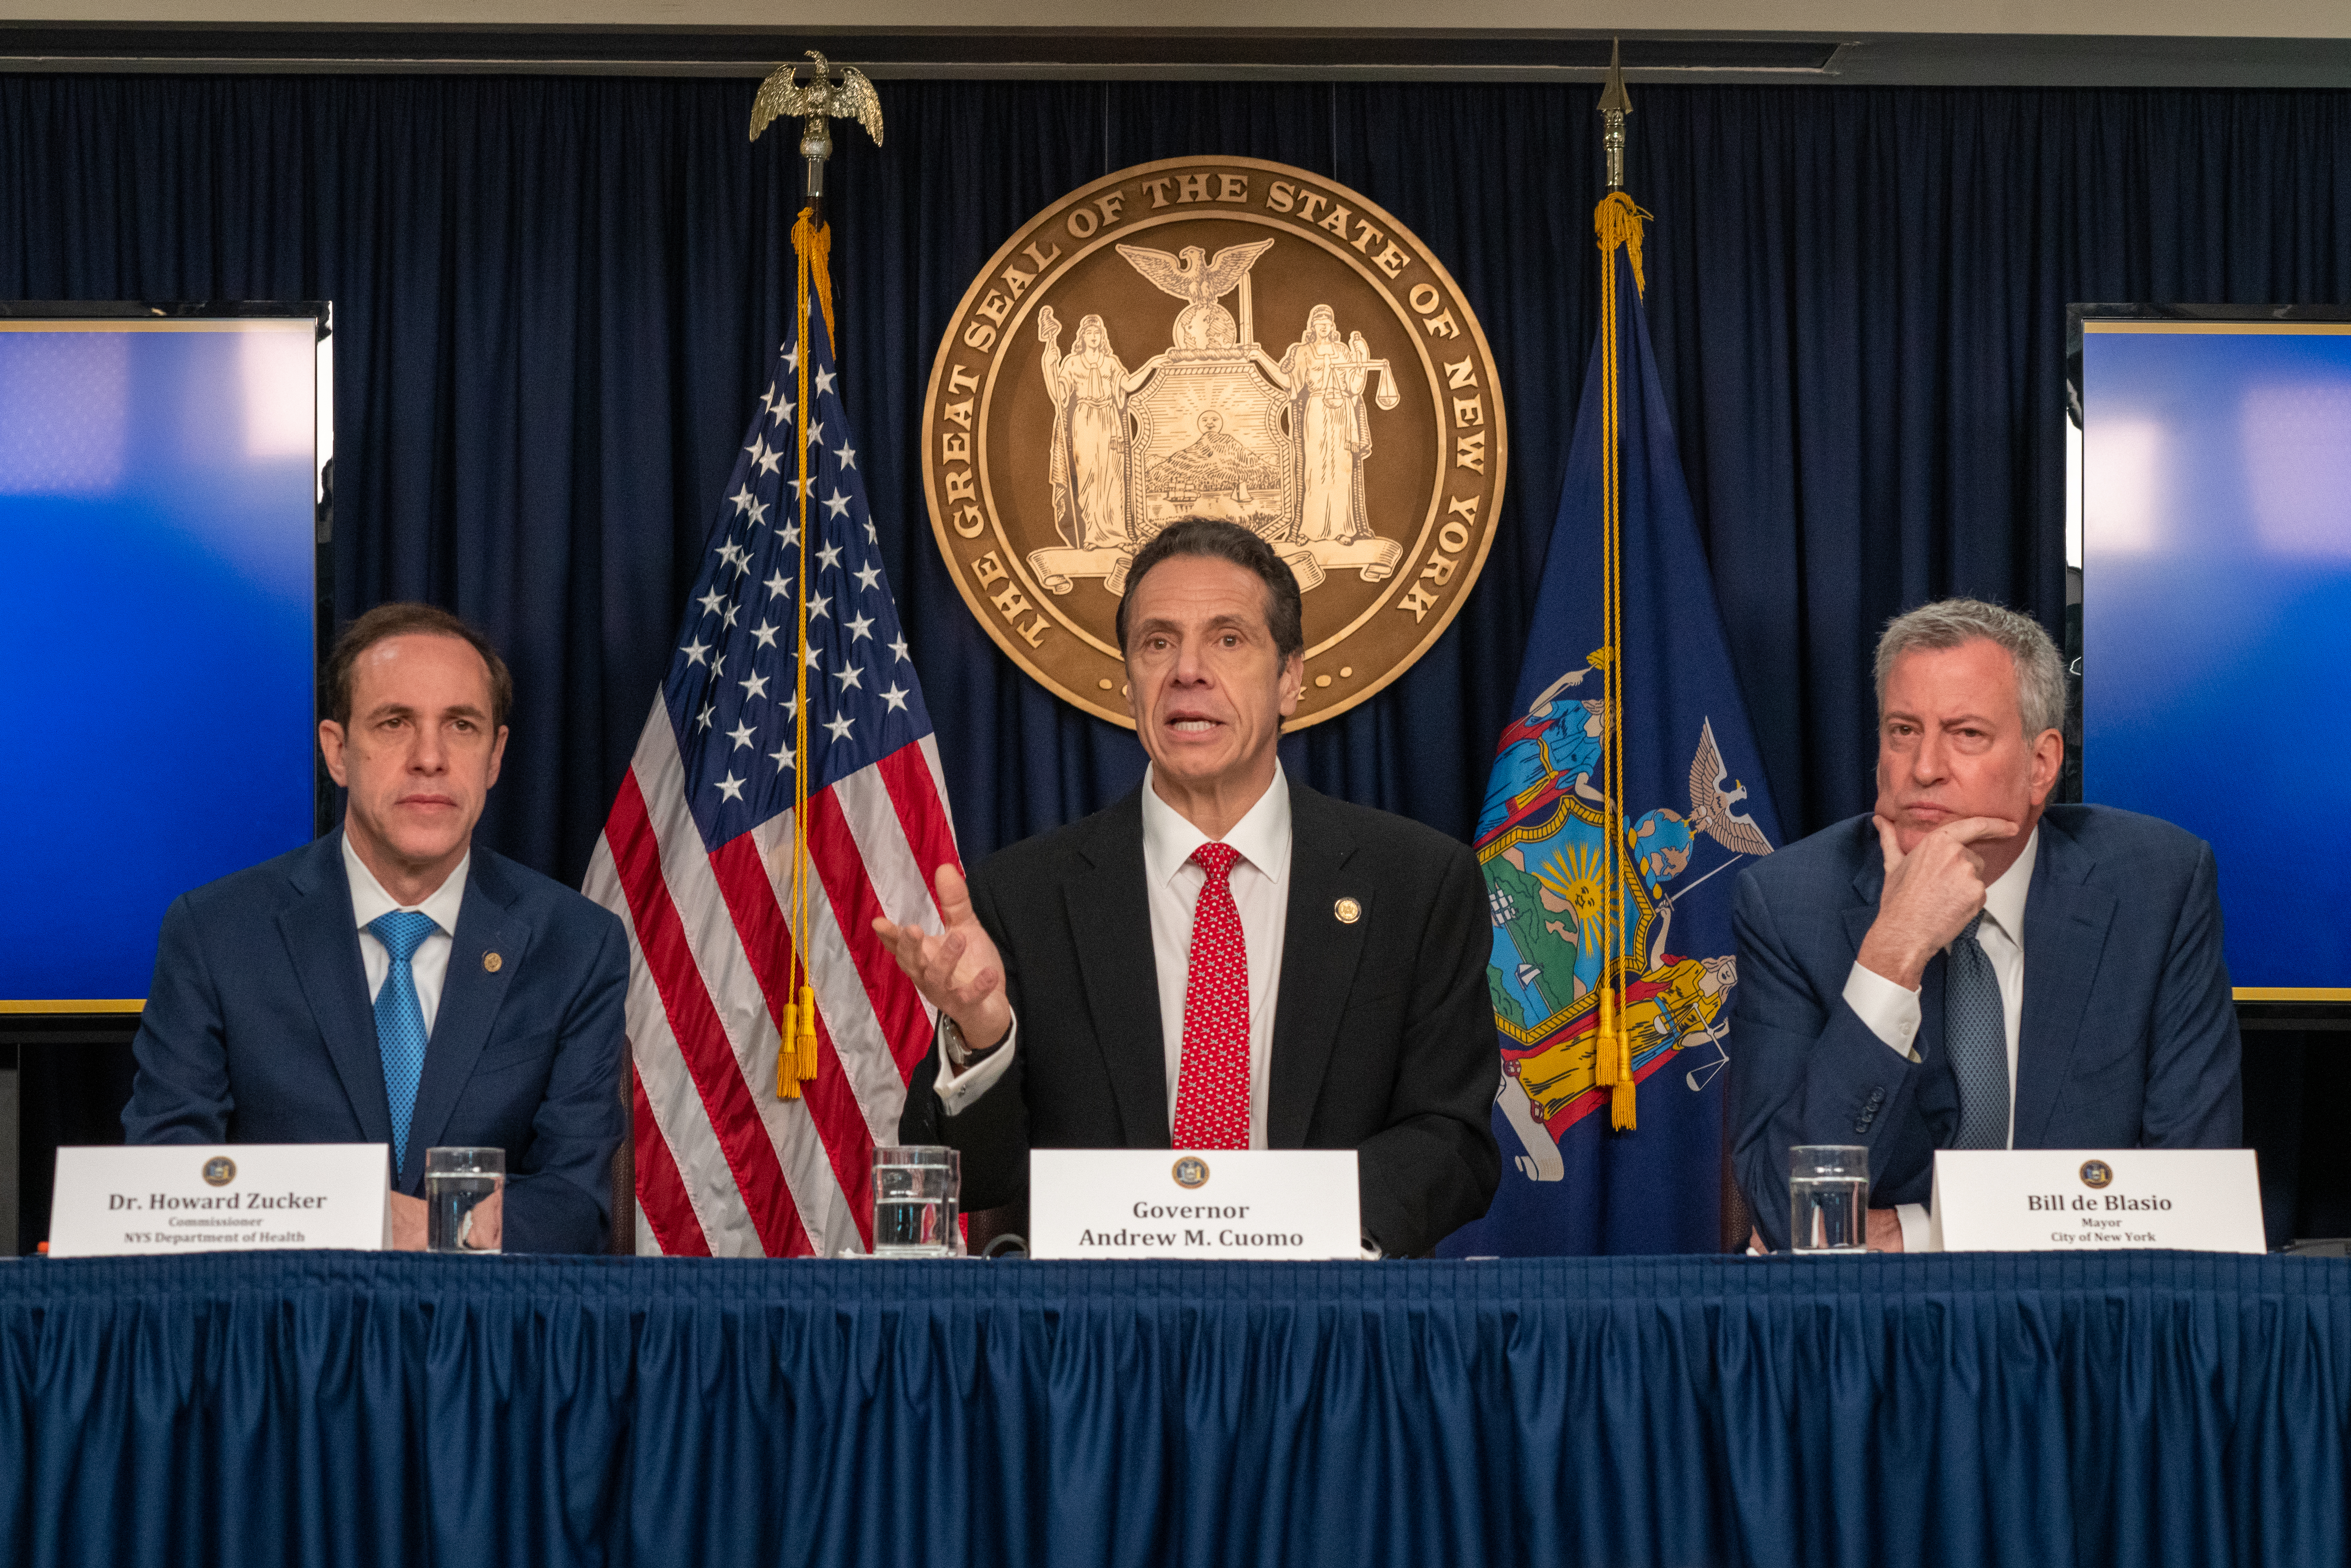 NEW YORK, NY - MARCH 2: New York state Gov. Andrew Cuomo (C), New York City Mayor Bill DeBlasio (R) and New York state Department of Health Commissioner Howard Zucker hold a news conference on the first confirmed case of COVID-19 in New York on March 2, 2020 in New York City. A female health worker in her 30s who had traveled in Iran contracted the virus and is now isolated at home with symptoms of COVID-19, but is not in serious condition. Cuomo said in a statement that the patient "has been in a controlled situation since arriving to New York." (Photo by David Dee Delgado/Getty Images)